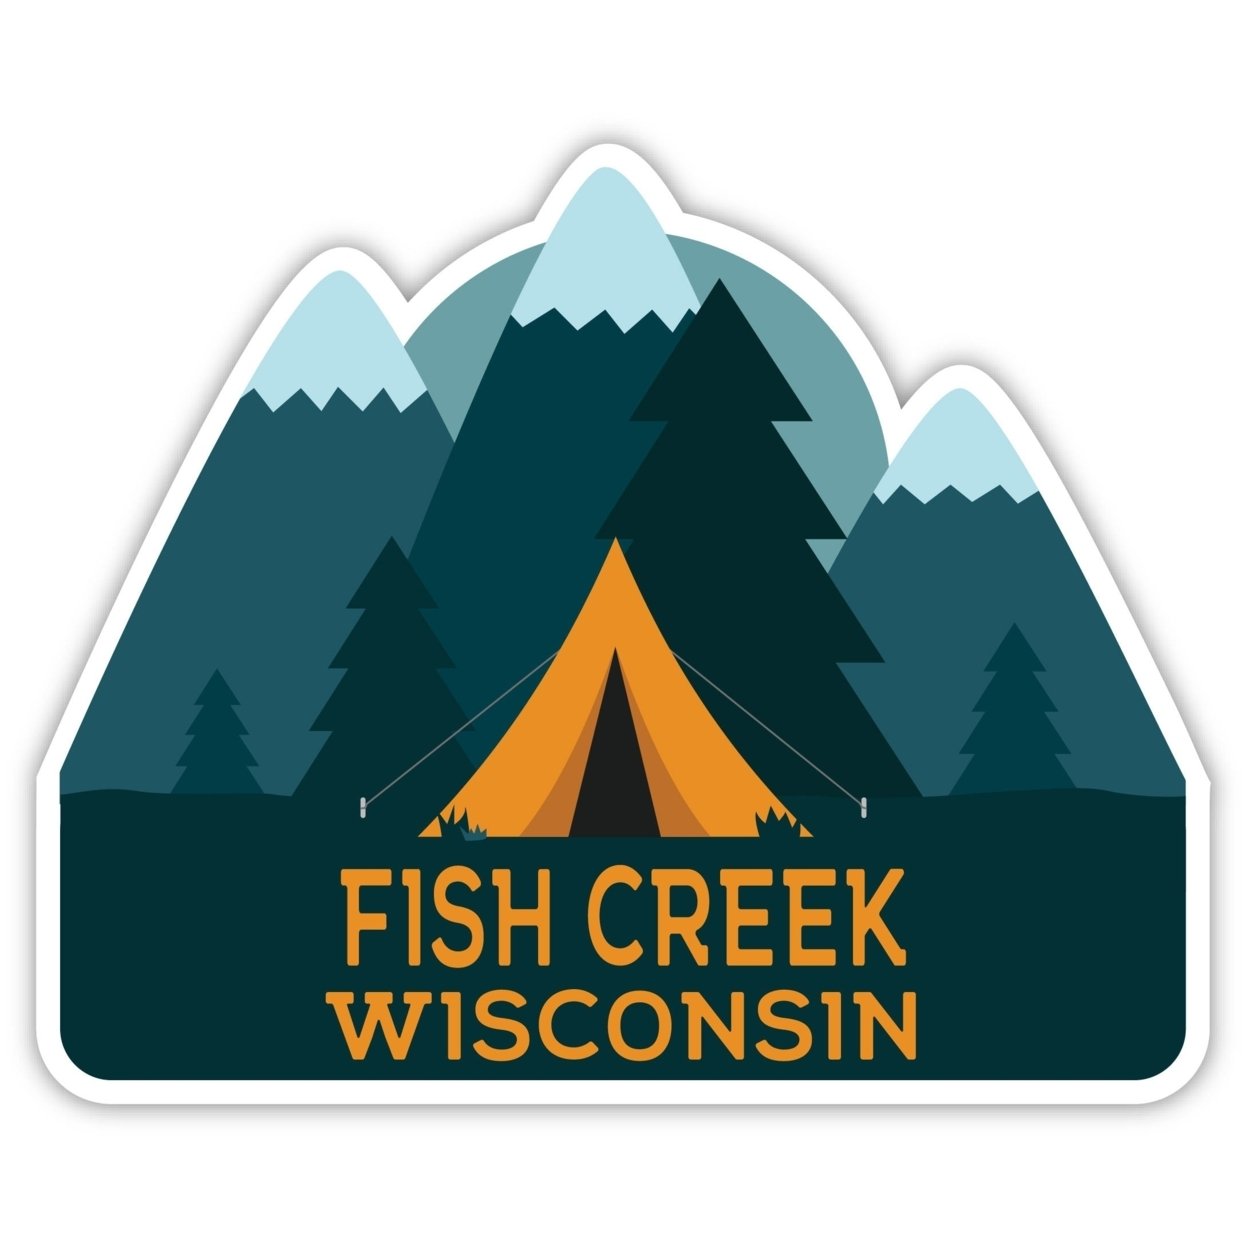 Fish Creek Wisconsin Souvenir Decorative Stickers (Choose Theme And Size) - 4-Pack, 10-Inch, Tent